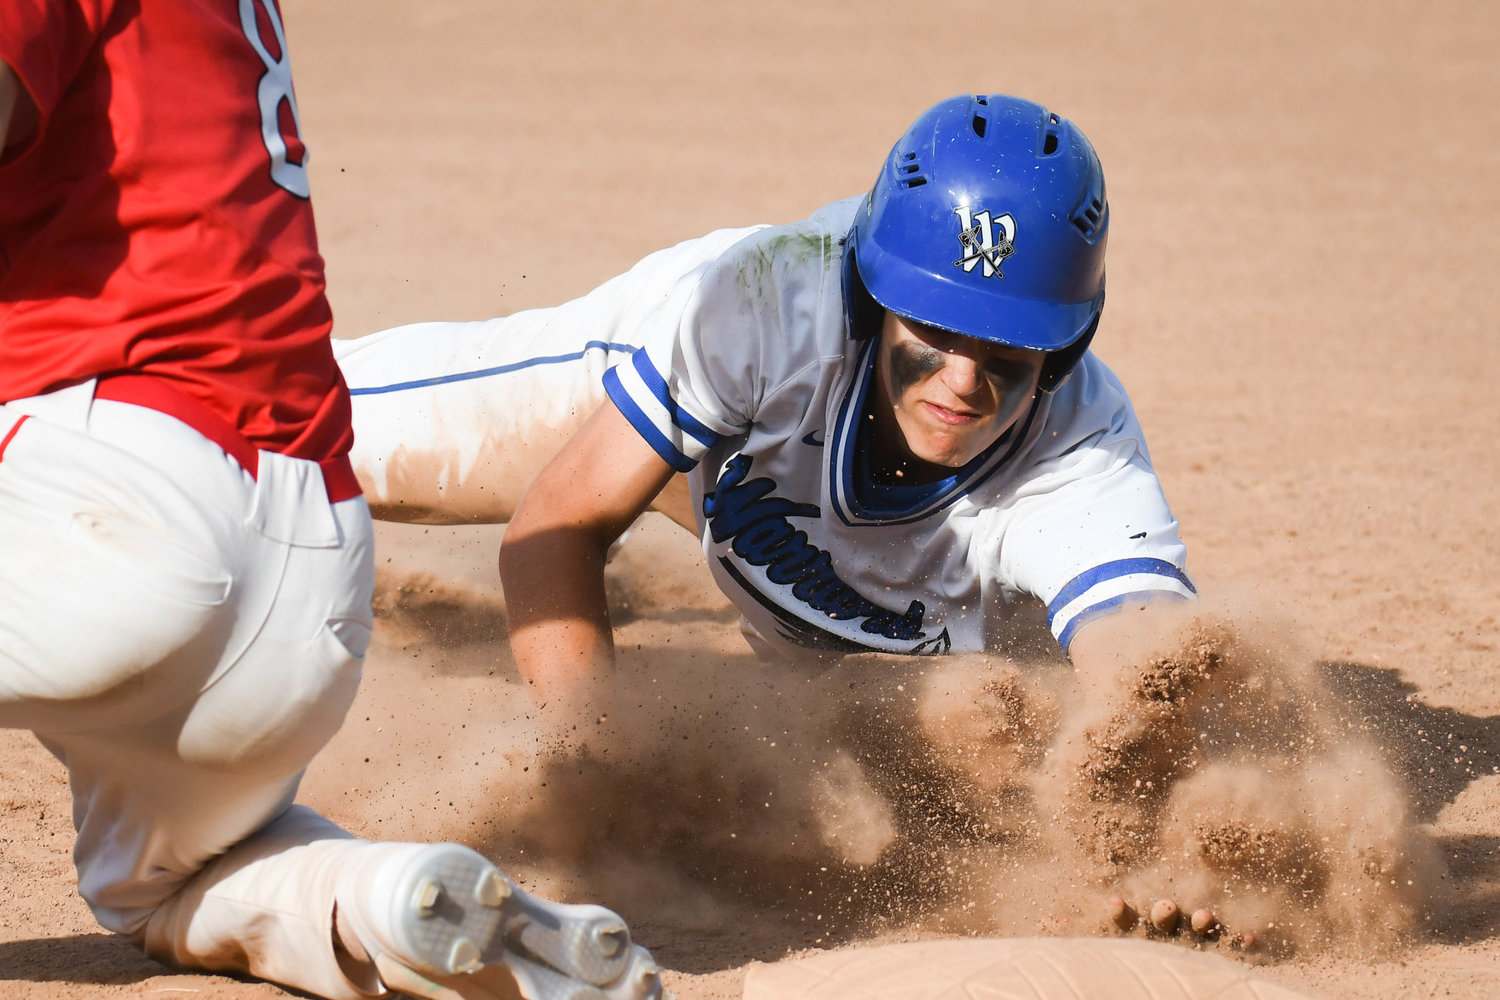 Whitesboro baserunner Ty Montrose dives safely back to first base during a pickoff attempt during the game against Jamesville-Dewitt on Thursday. The Warriors won 4-2 to advance to the Section III Class A semifinals.